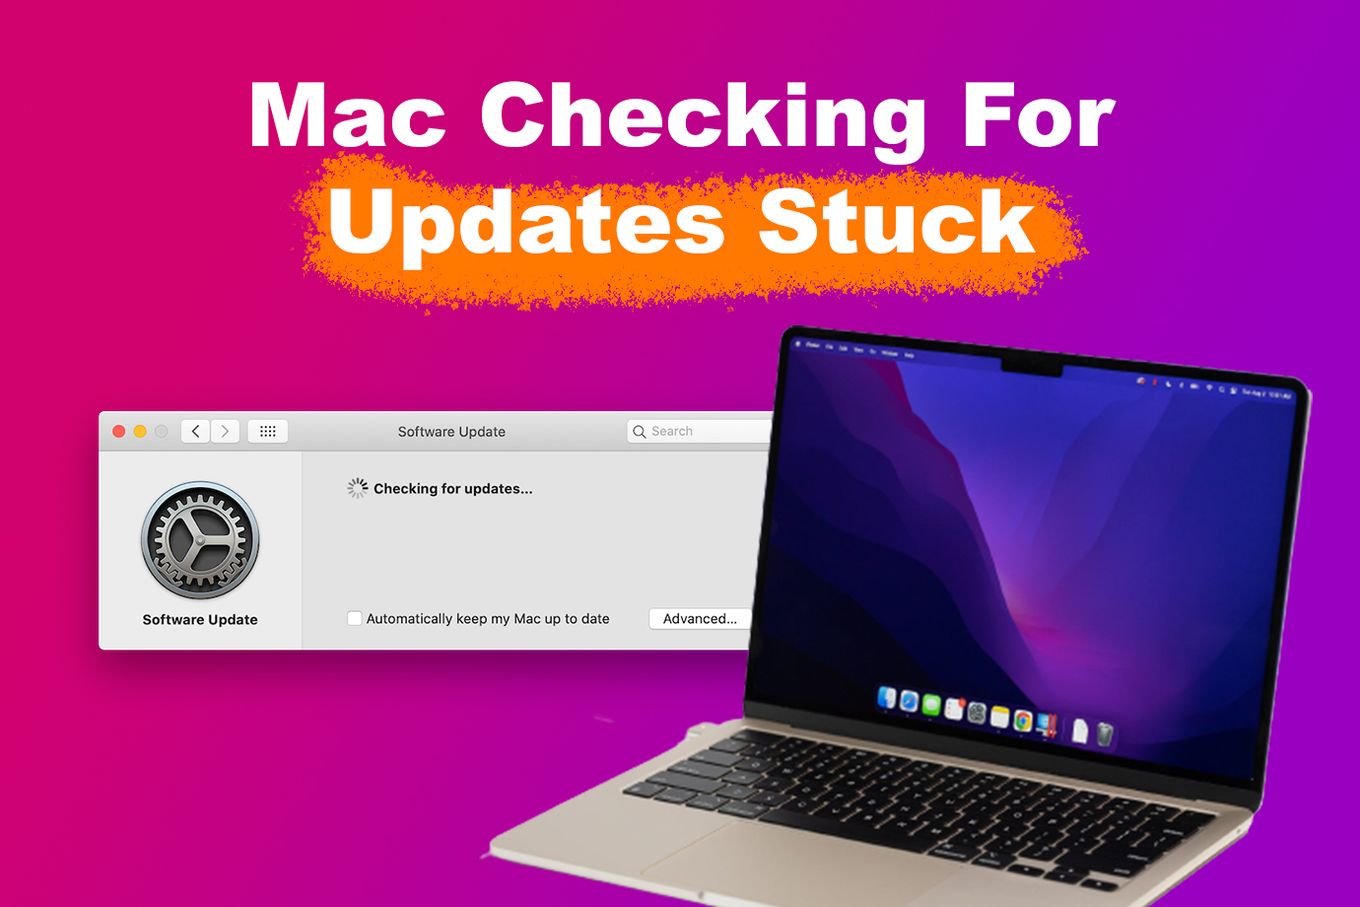 Go to the Applications folder and locate the install data for the stuck update
Delete the install data and restart the MacBook